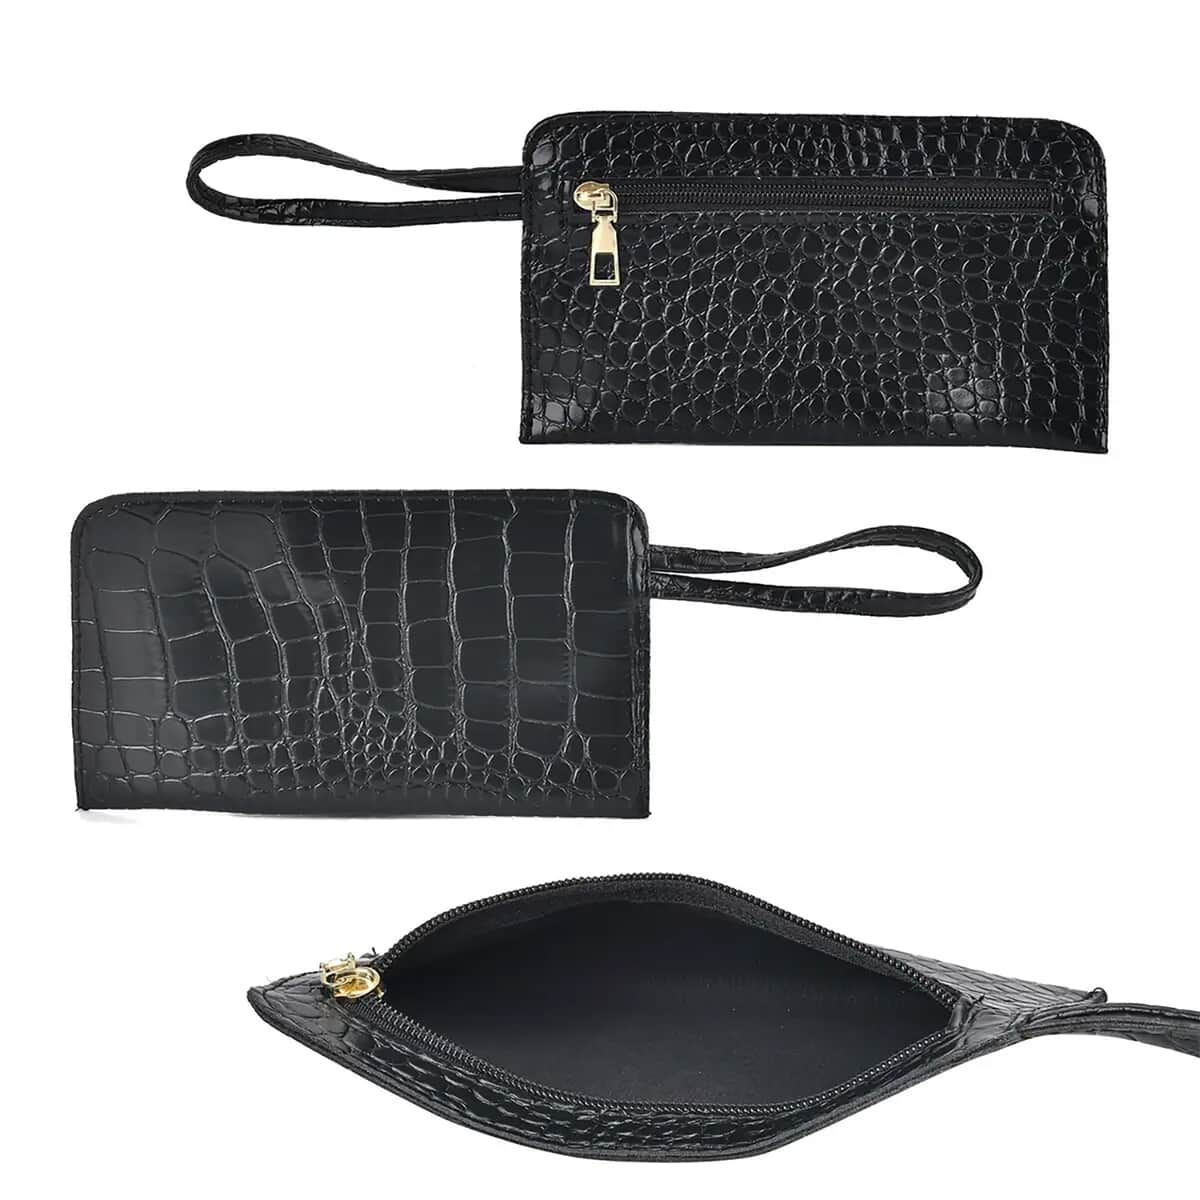 TLV Set of 5pcs Black Crocodile Embossed Faux Leather Tote Bag, Crossbody Bag, Wrist Pouch, Wallet and Card Holder (7.5"x3.9" - 9.8"x4.7"x9.4") image number 9